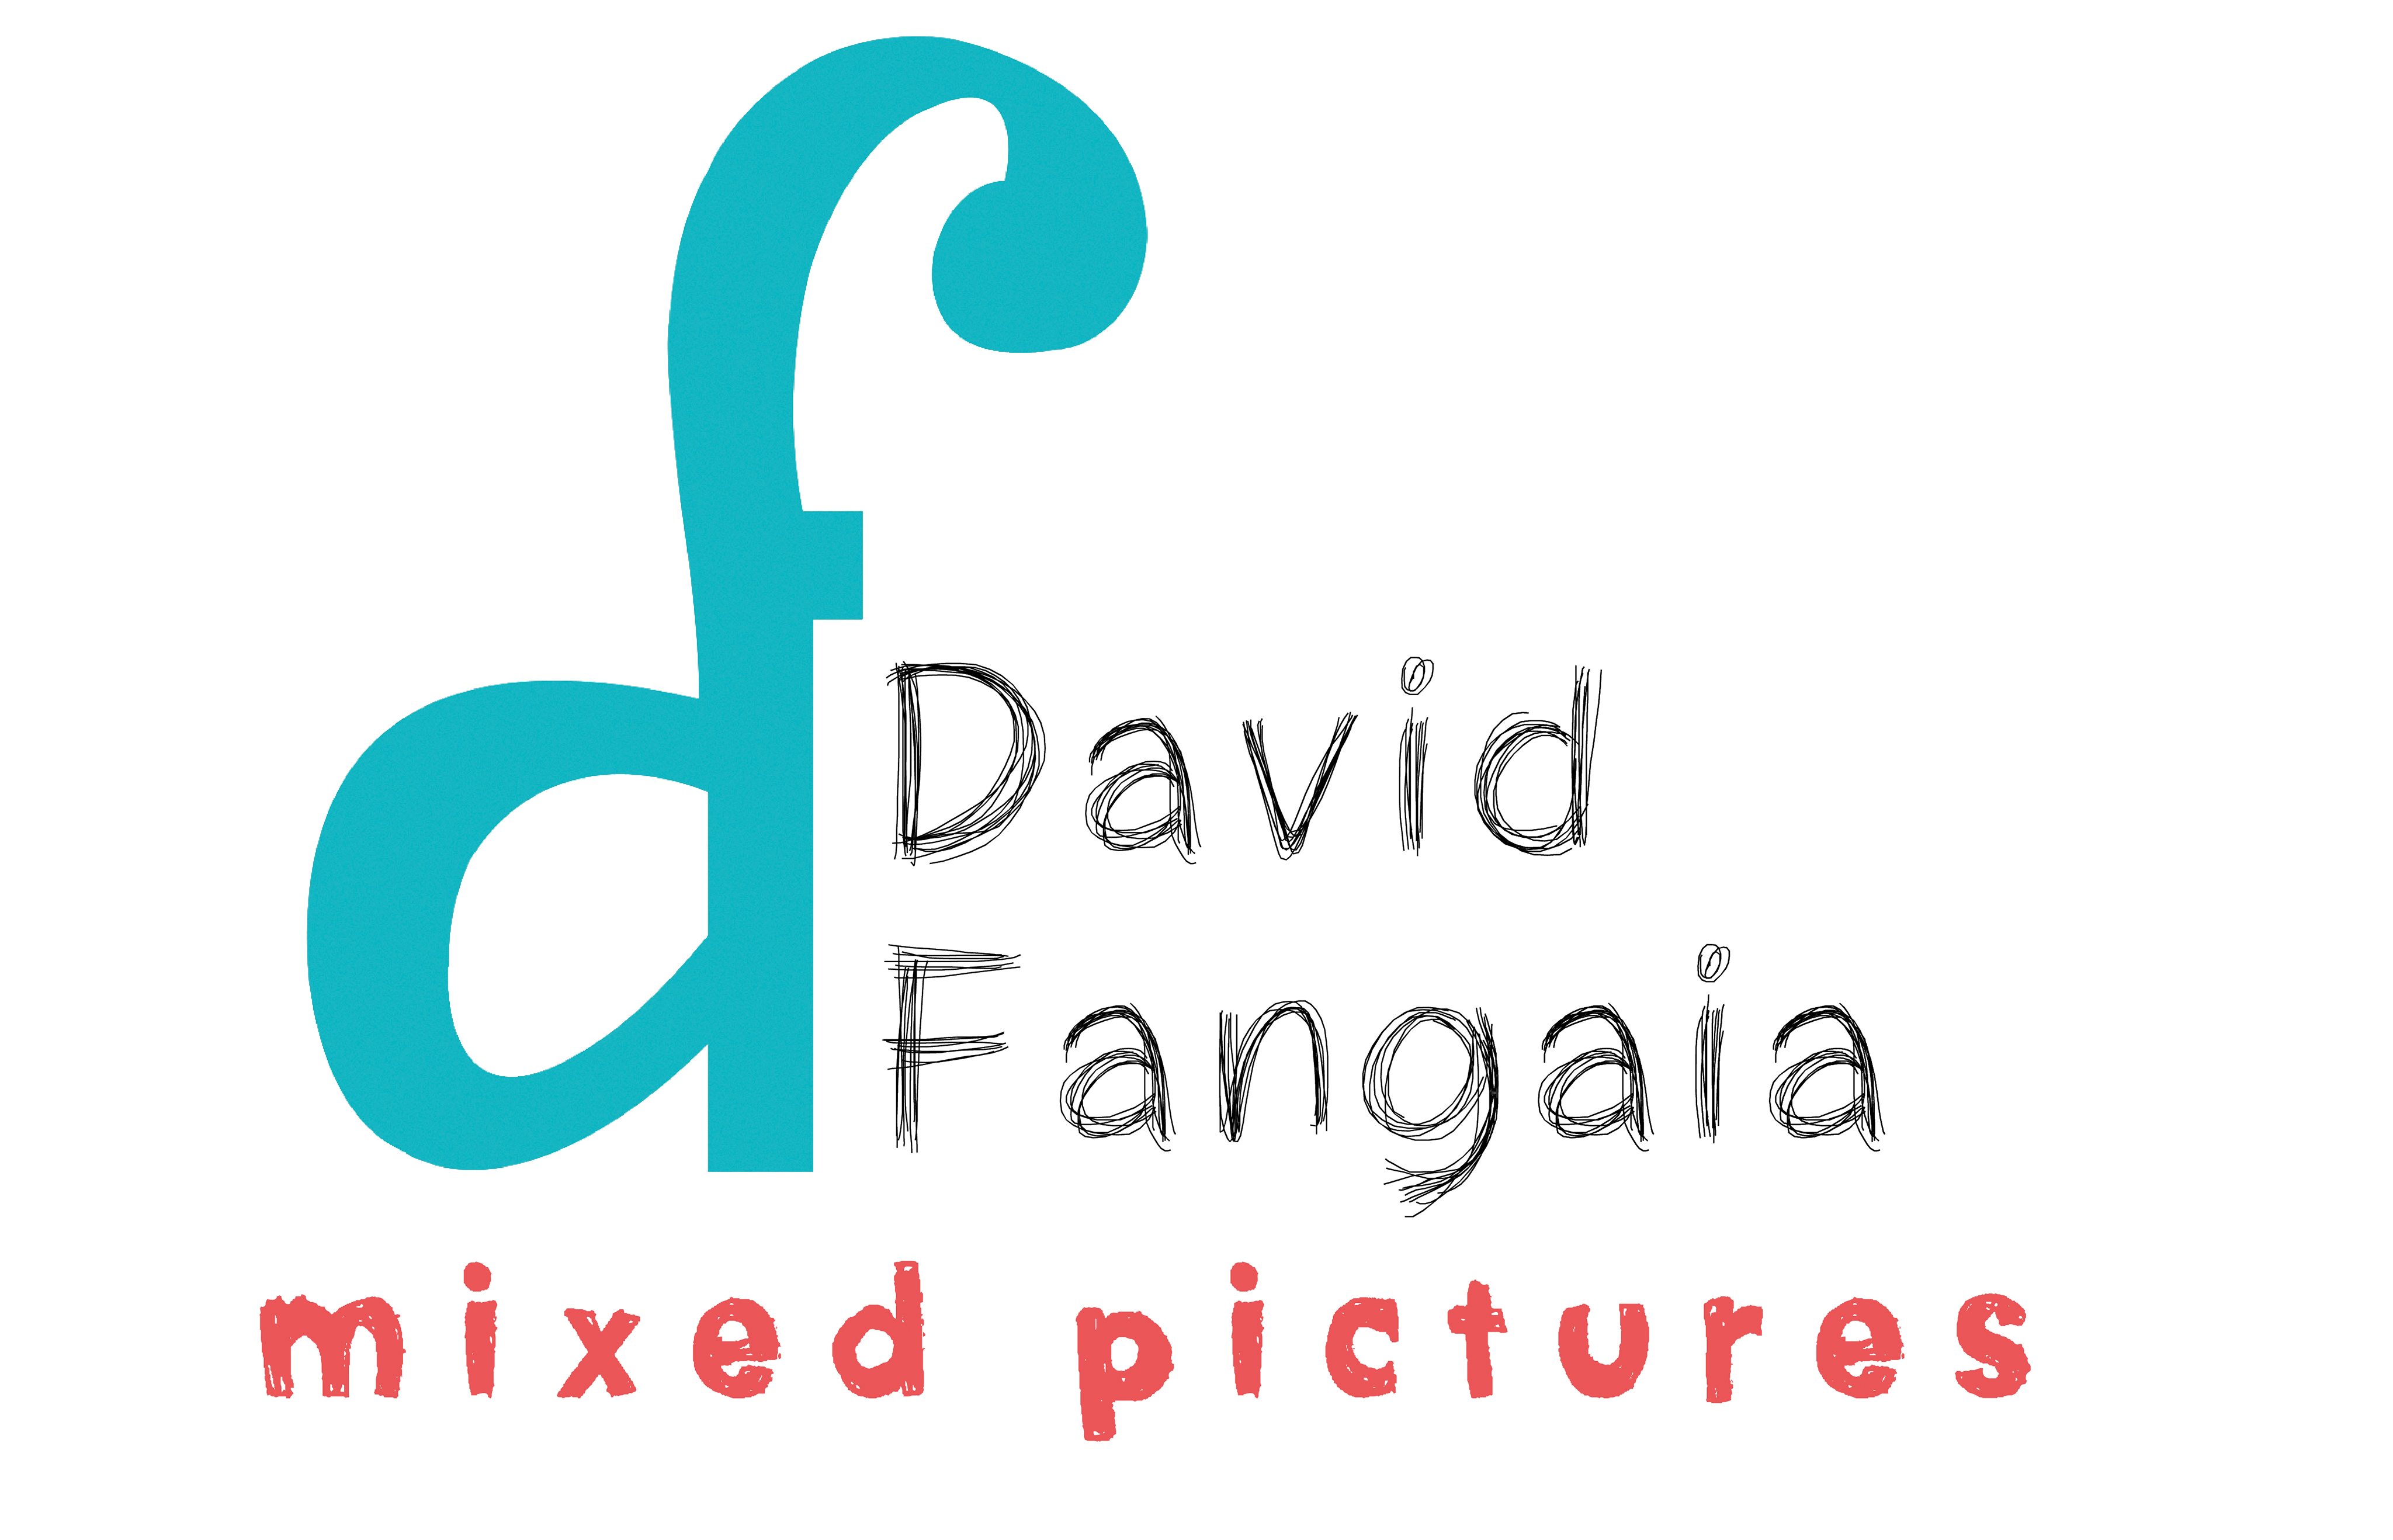 David Fangaia's mixed pictures